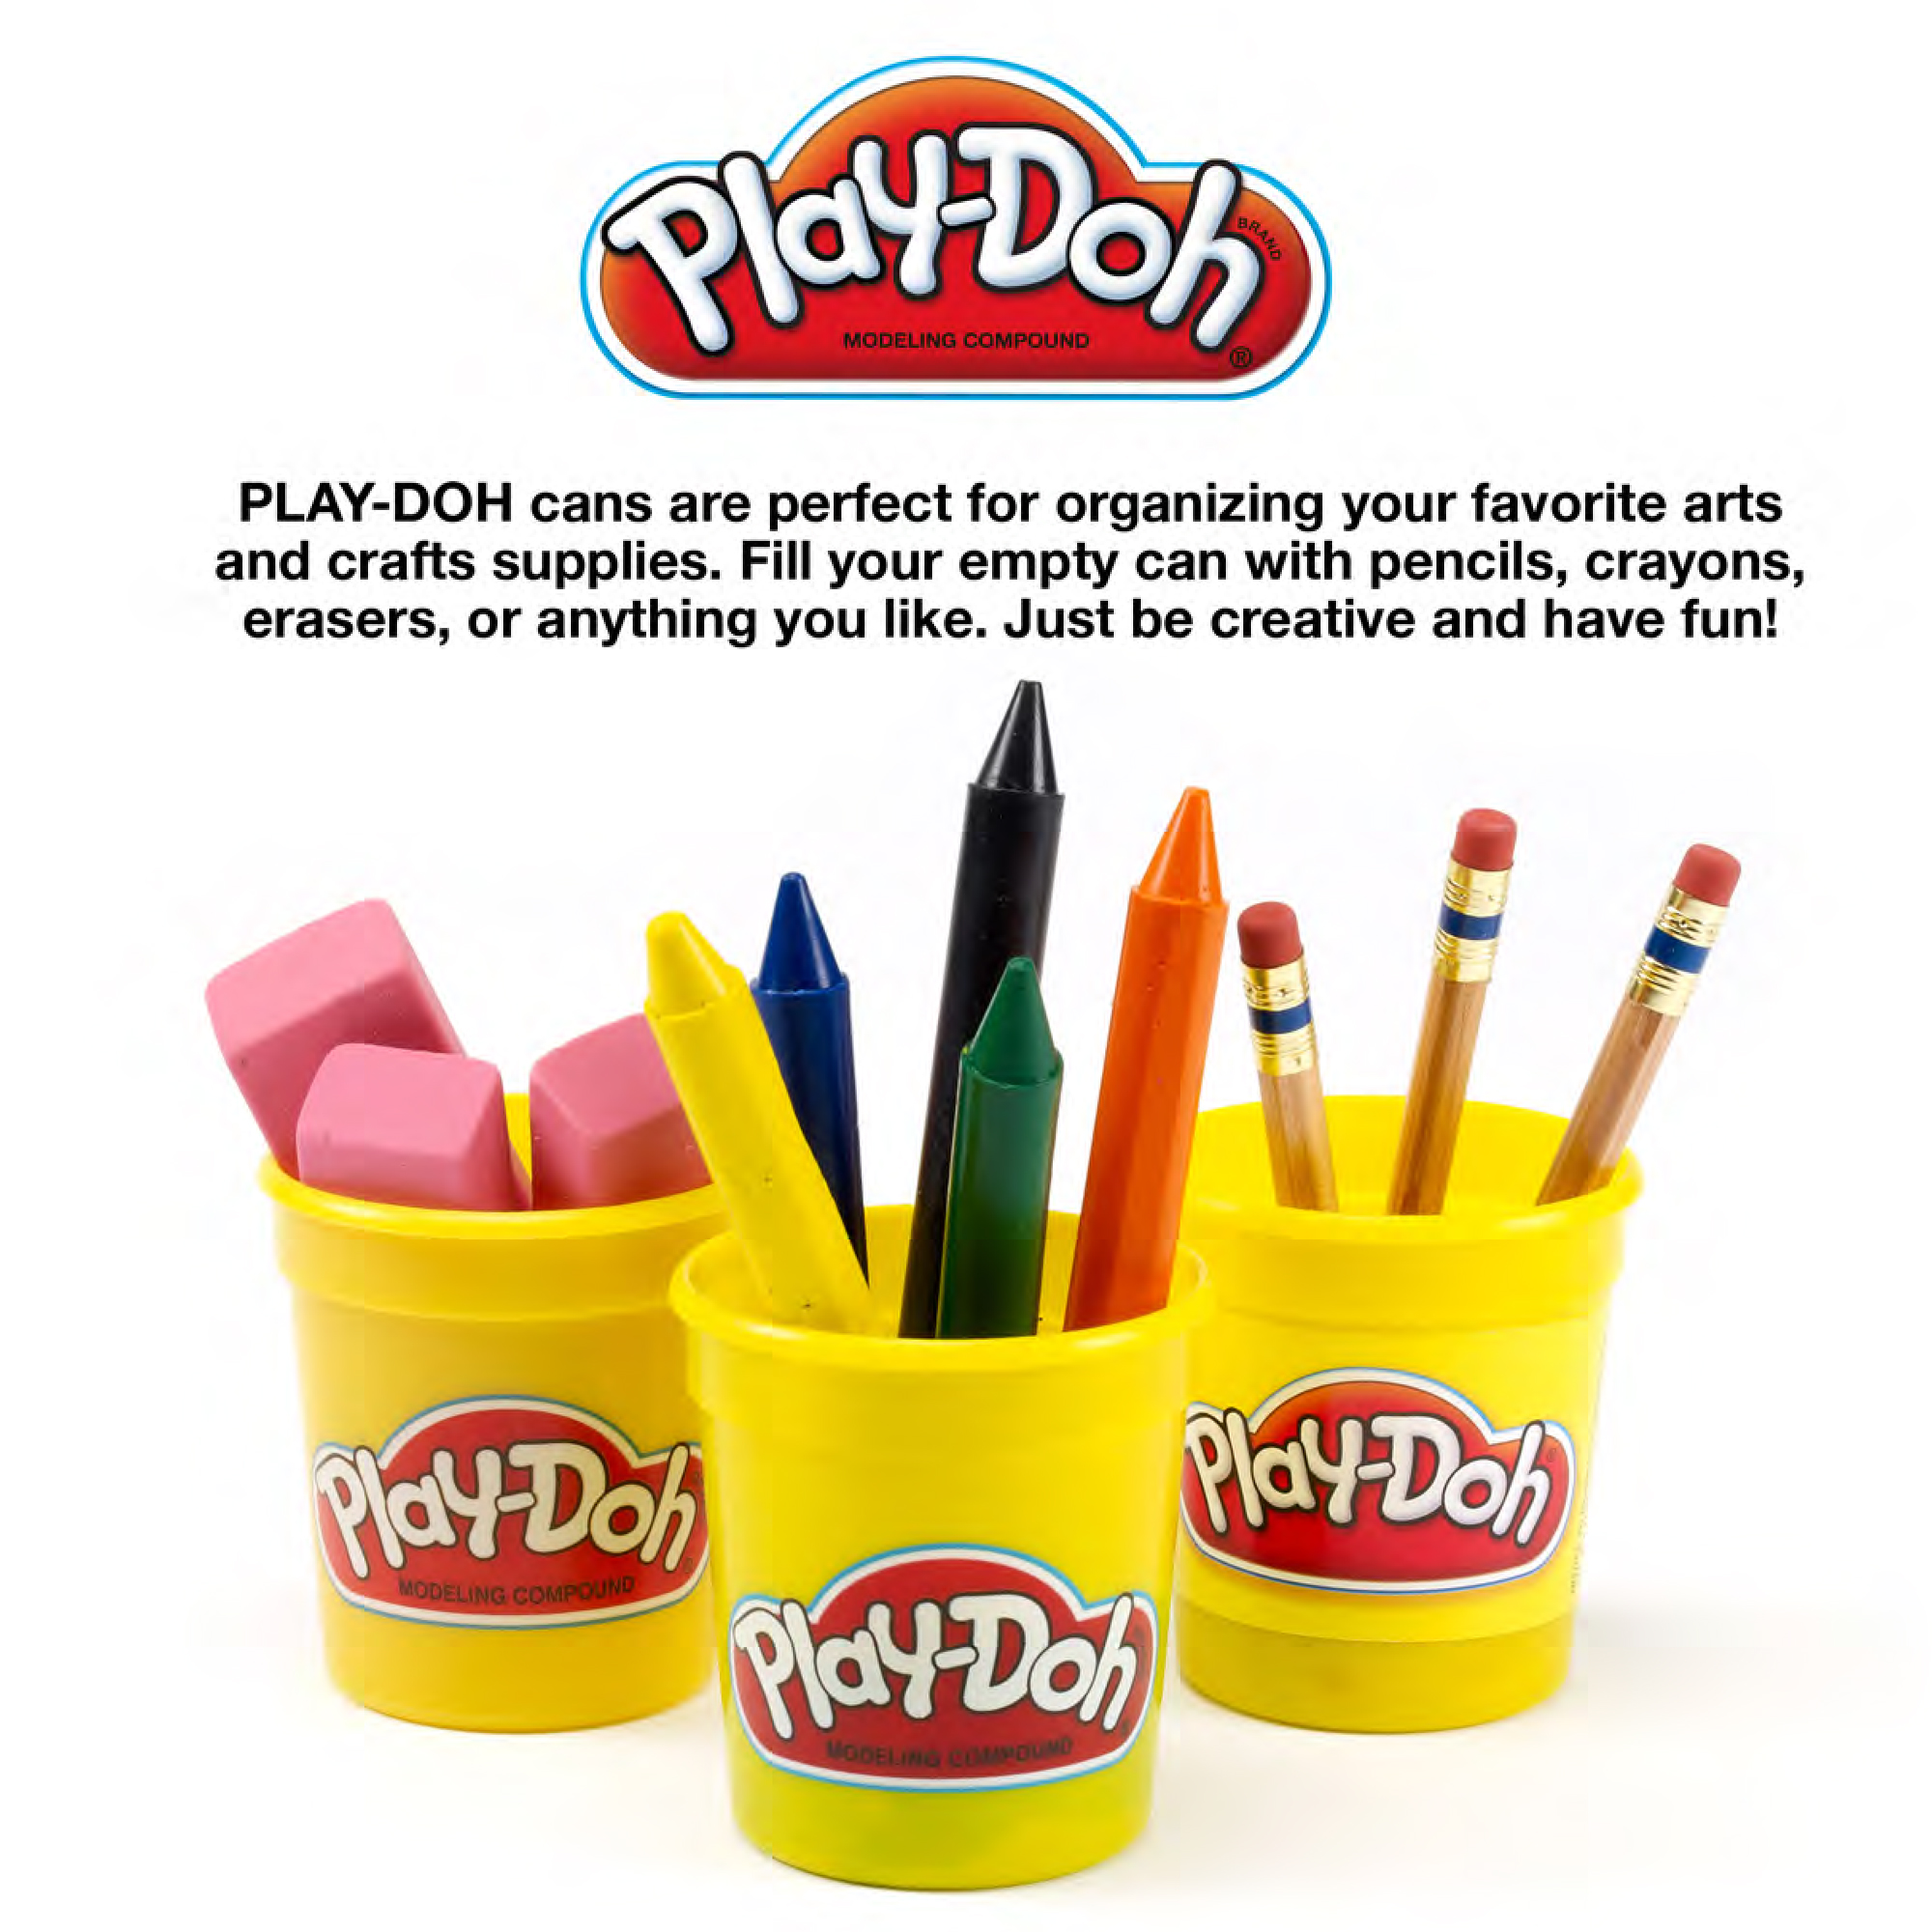 Play-Doh Modeling Compound Play Dough Can - Bright Red (4 oz) - image 3 of 3